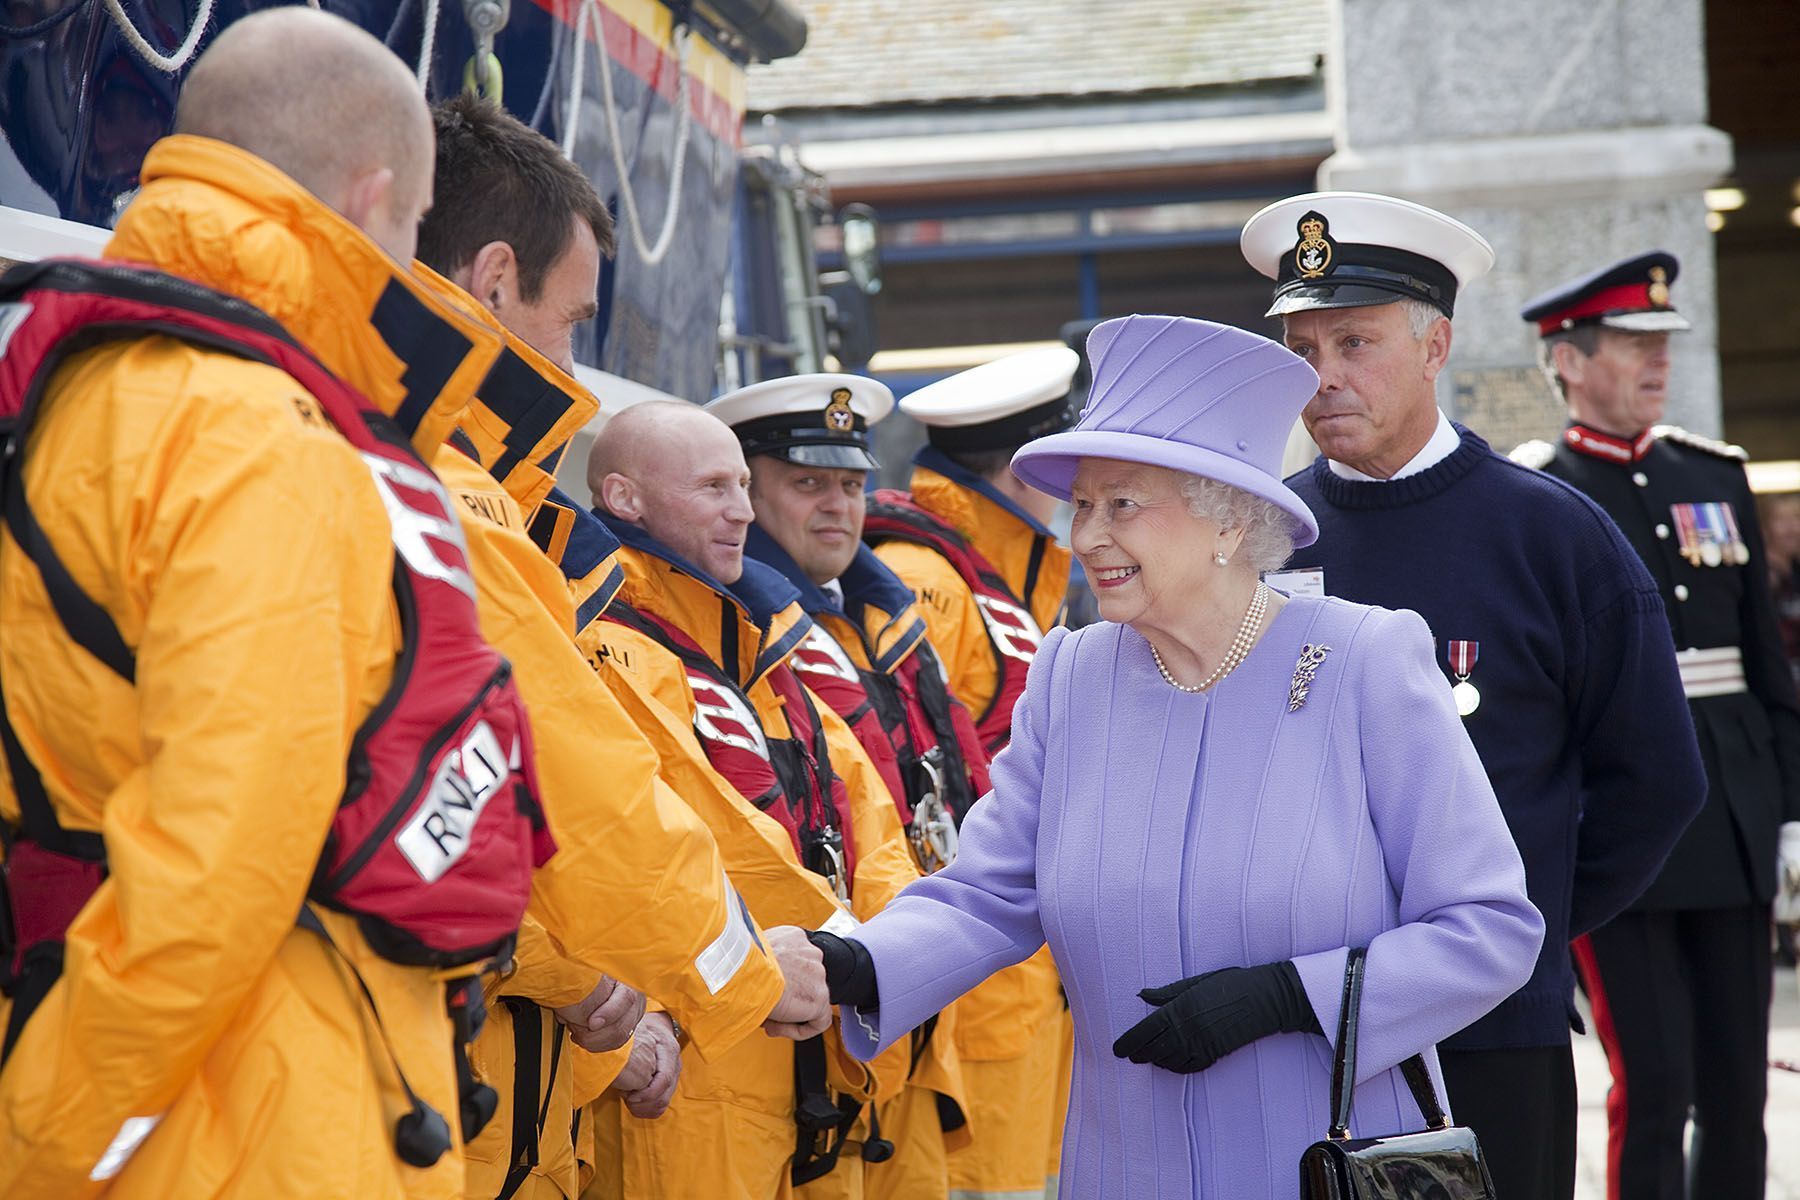 St Ives coxswain Paul Whiston (right) introduces the crew to the Queen Picture: Phil Monckton